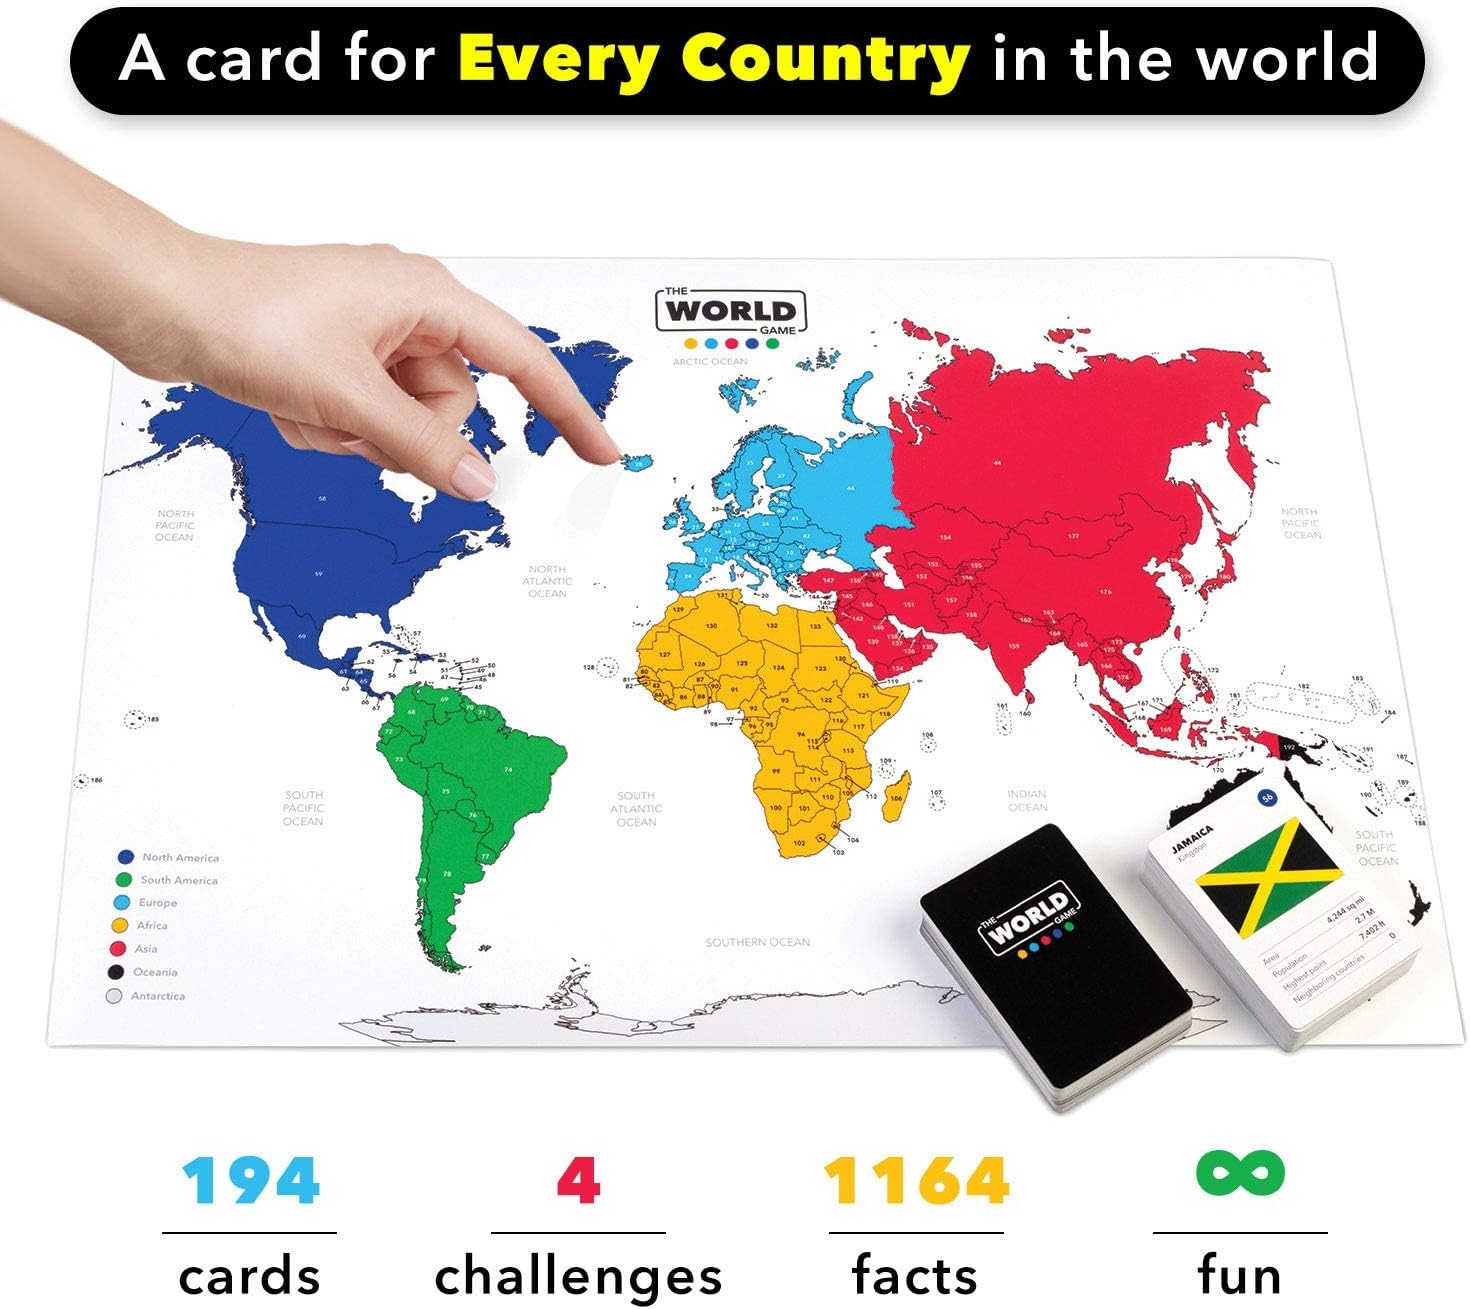 The World Game - Geography Card Game - Educational Board Game for Kids, Family  Adults - Cool Learning Gift Idea for Teenage Boys  Girls